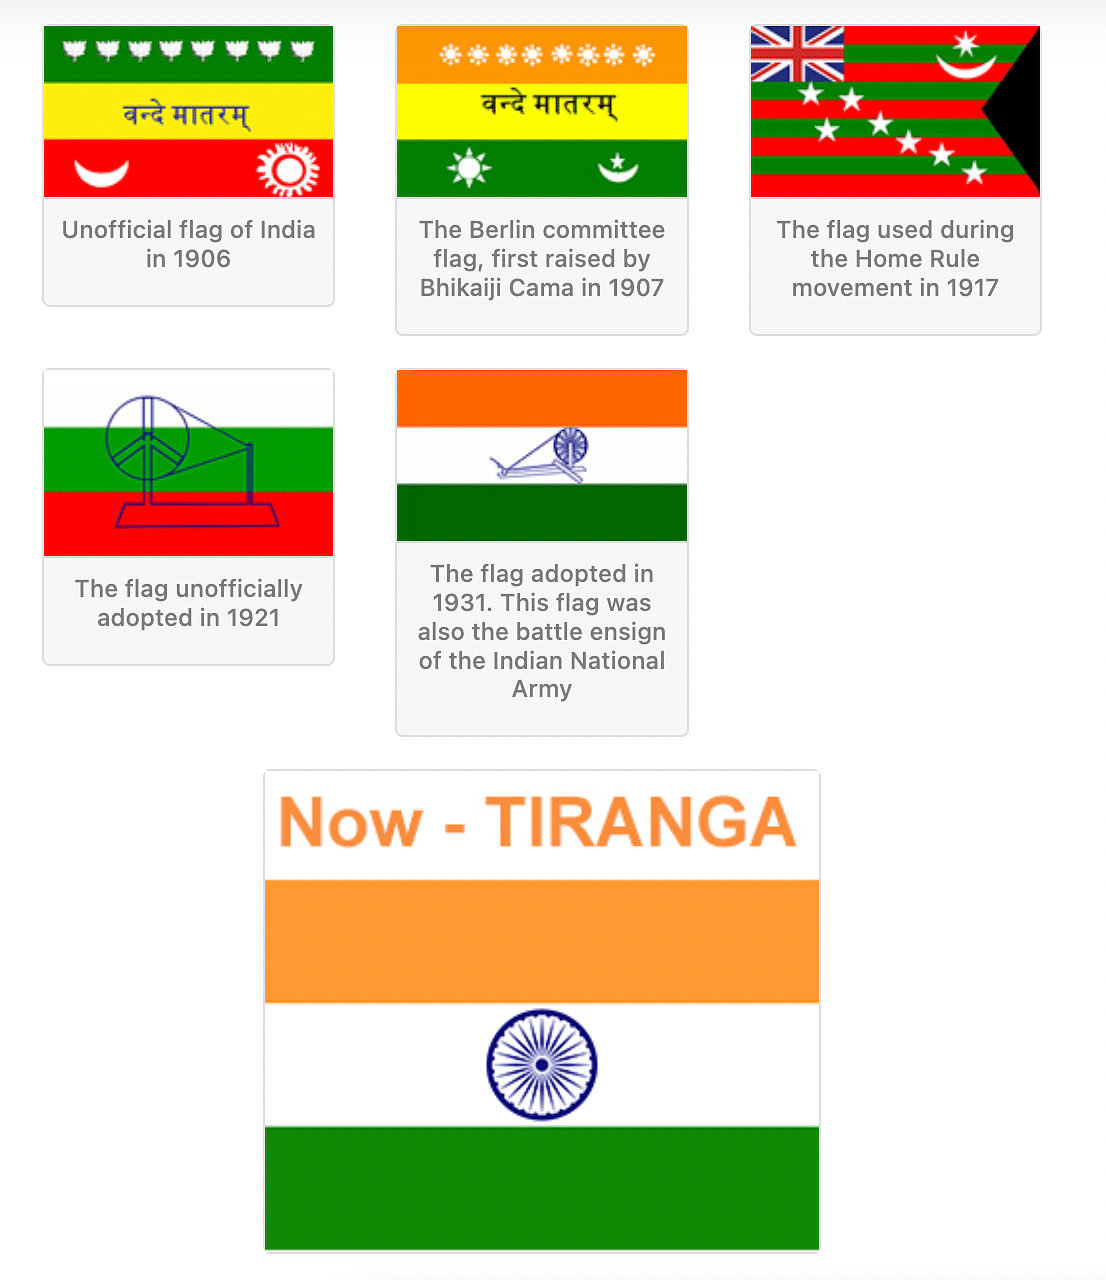 As per government websites and historian S Irfan Habib, the current version of our flag was adopted in 1947.